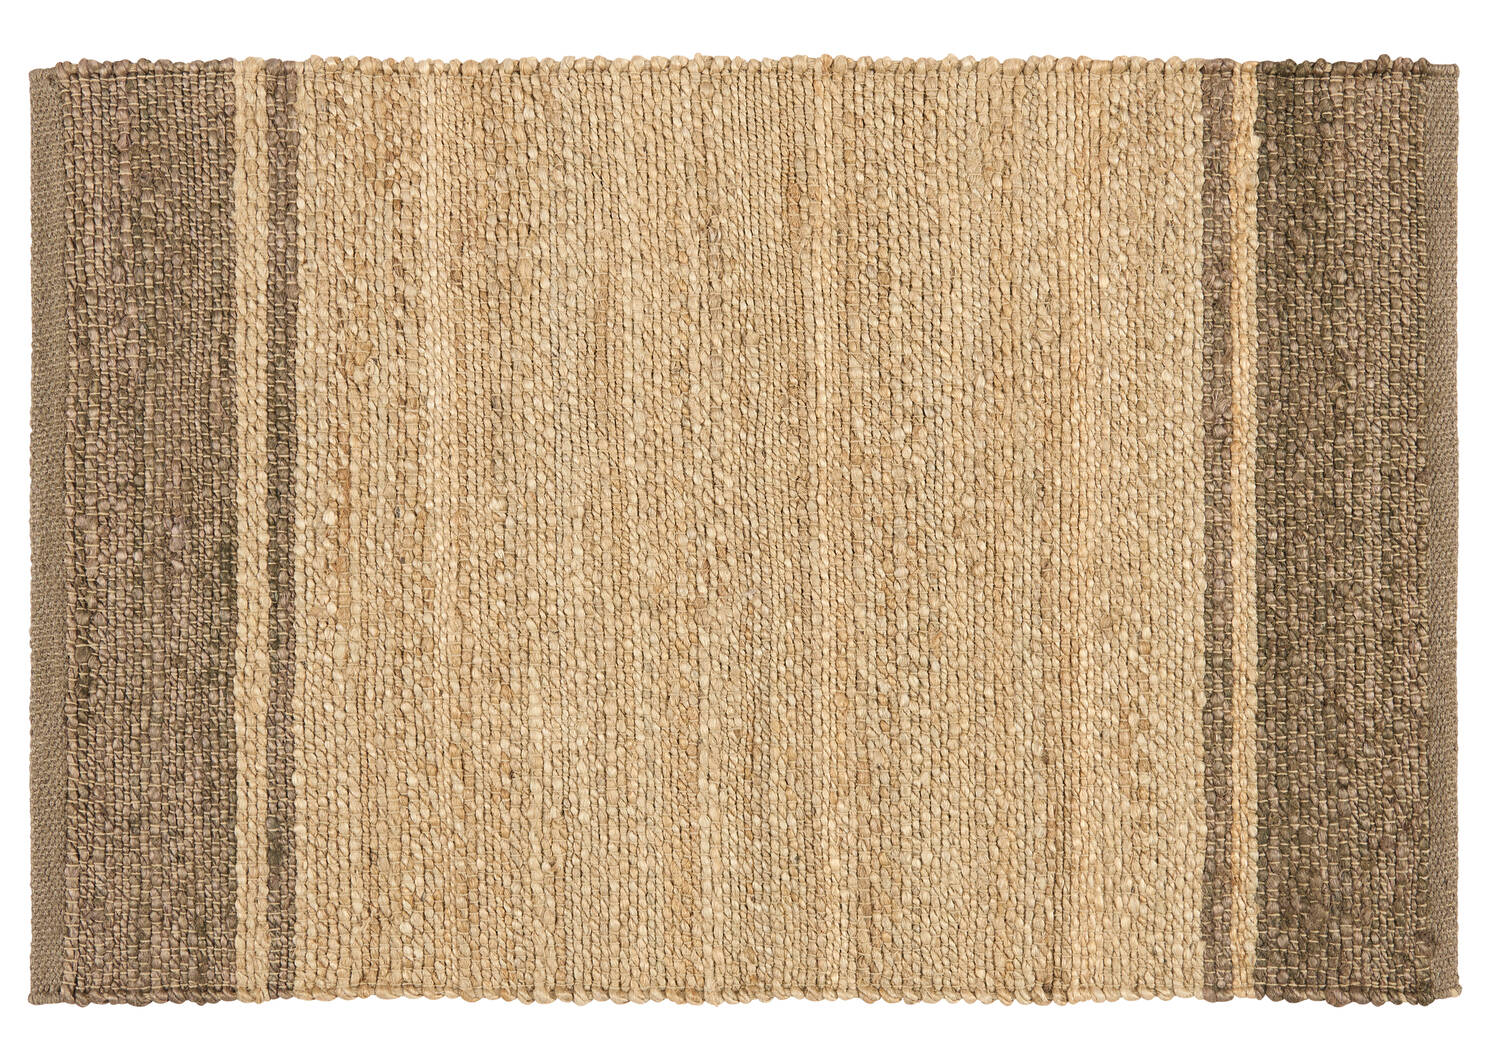 Connery Cotton Accent Rugs - Natural/Black